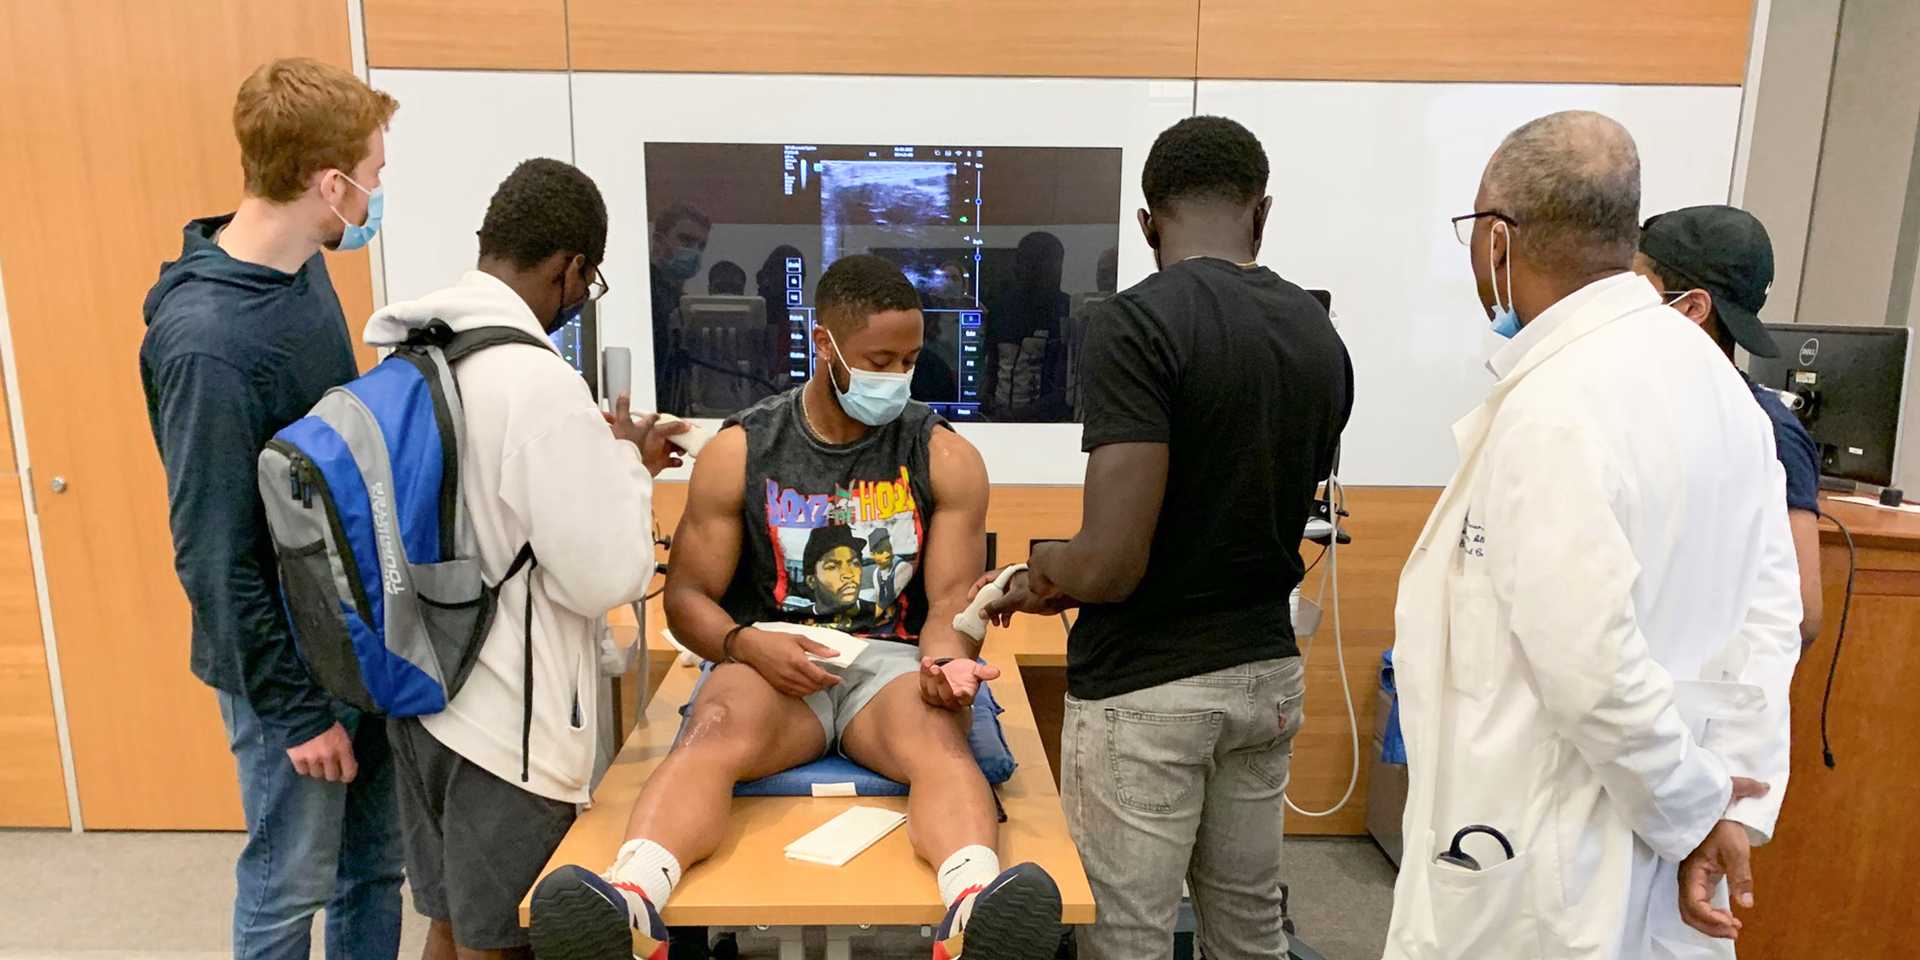 A young Black man sits on a table while three other young men demonstrate medical devices, while a doctor oversees.